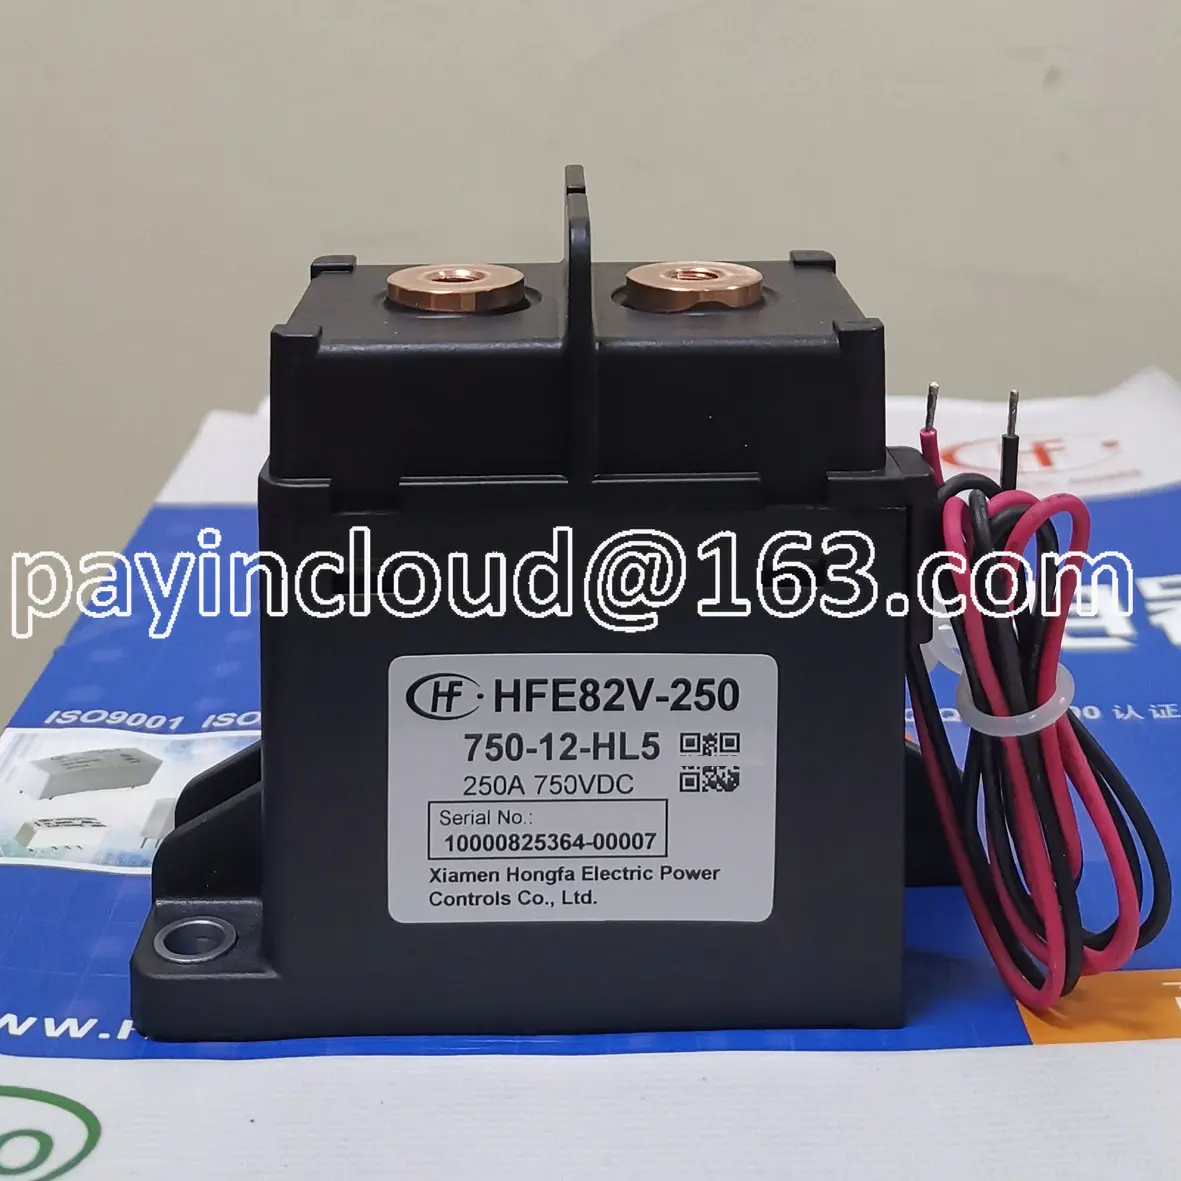 

HFE82V-250/750-12 24-Hl5 High Voltage DC Relay Contactor Electric Vehicle